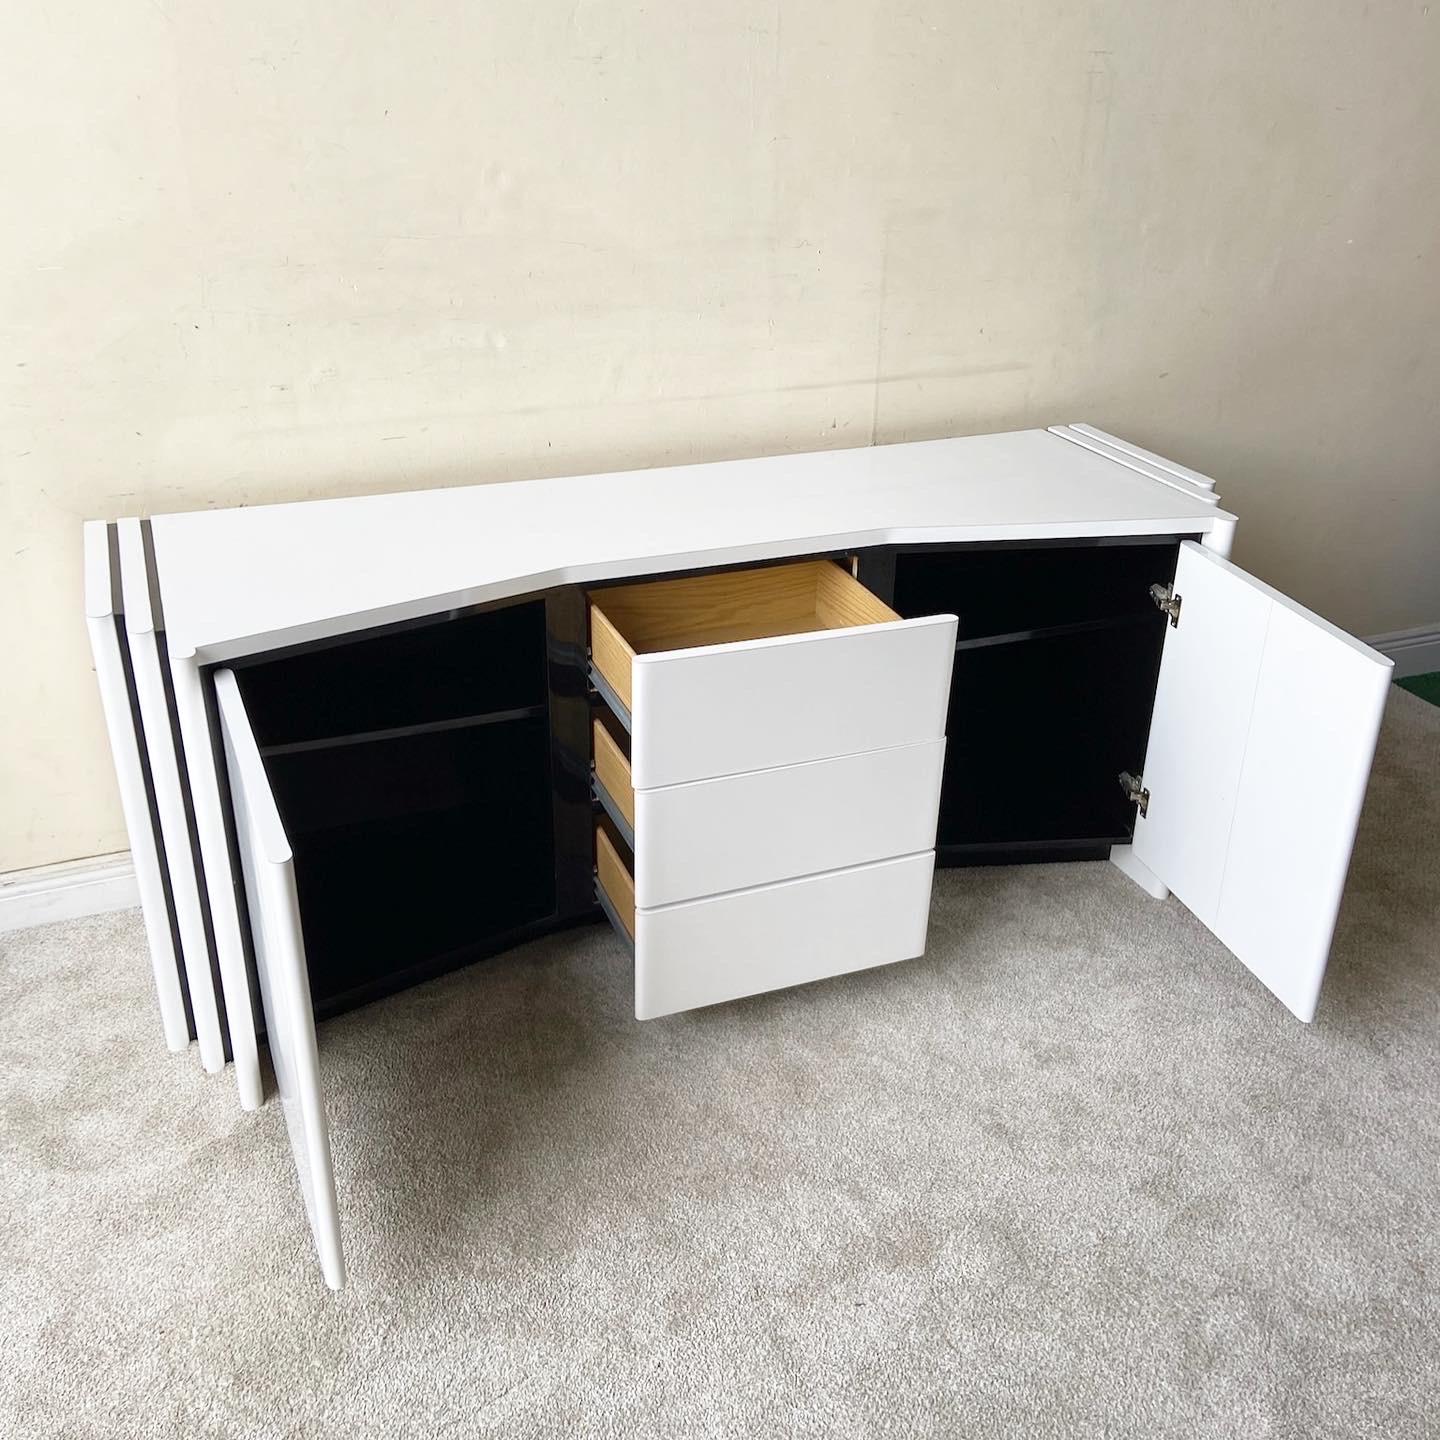 Amazing postmodern sculpted credenza. Features a white and black lacquer laminate with three central doors and cabinets with ample storage space.